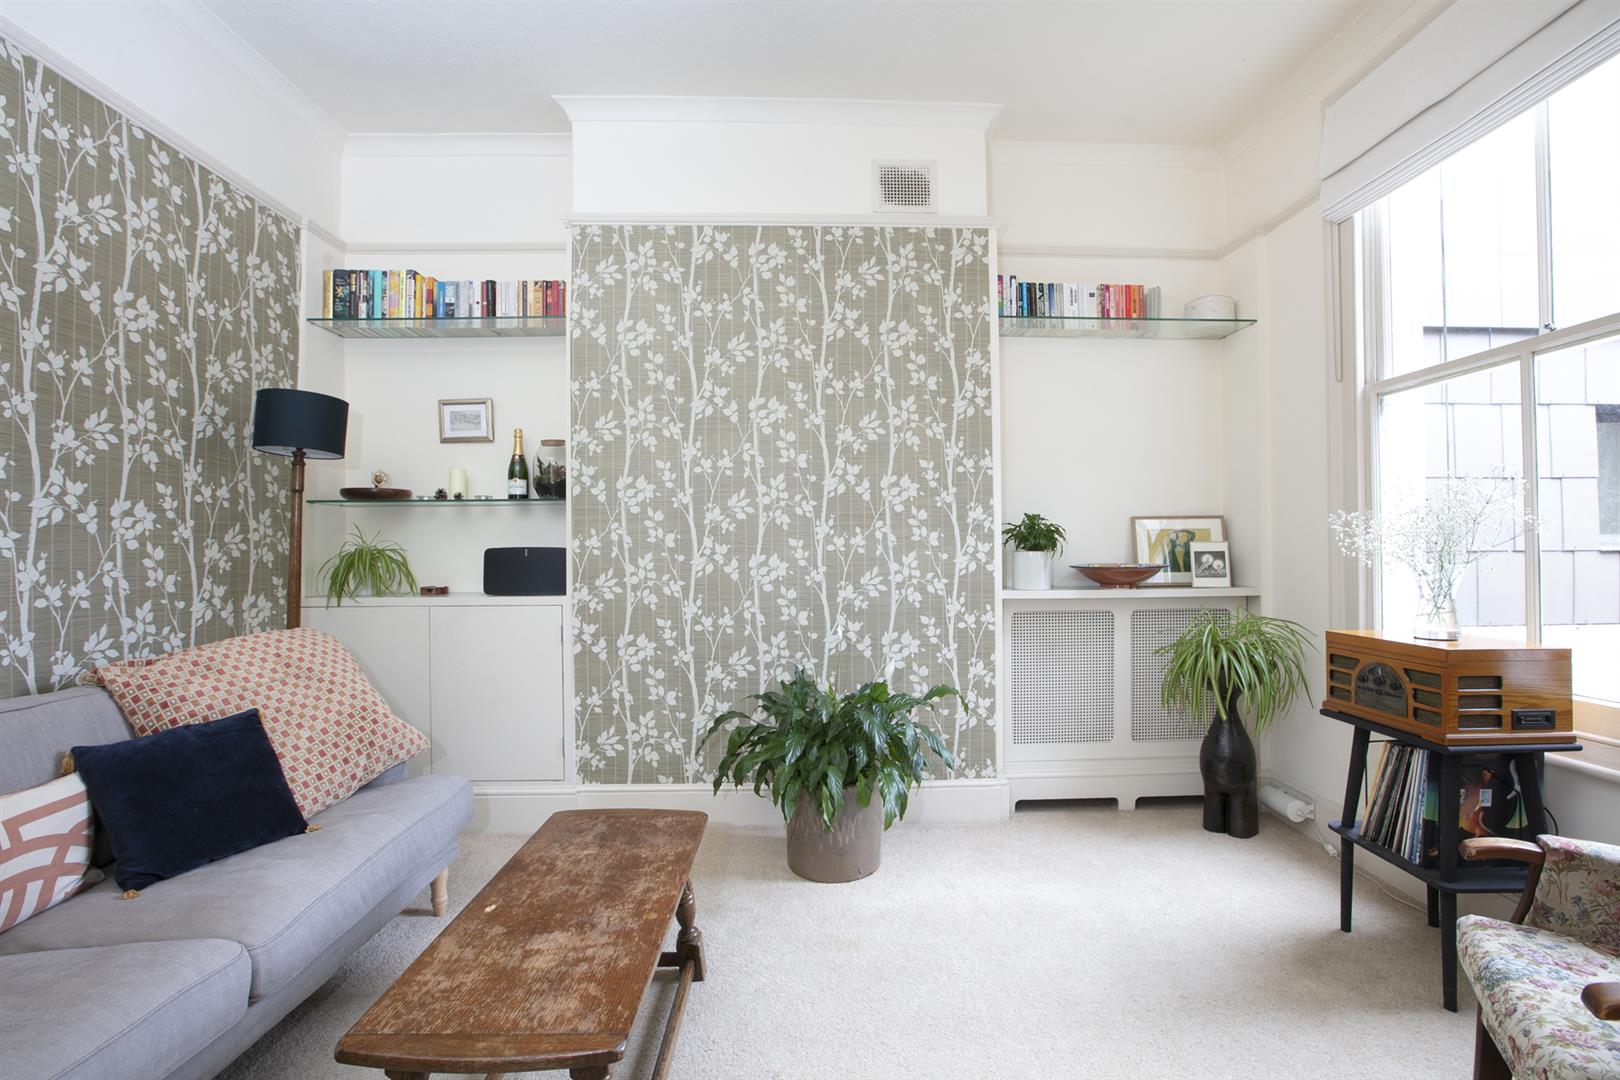 Flat - Conversion For Sale in Peckham Road, Camberwell, SE5 859 view4